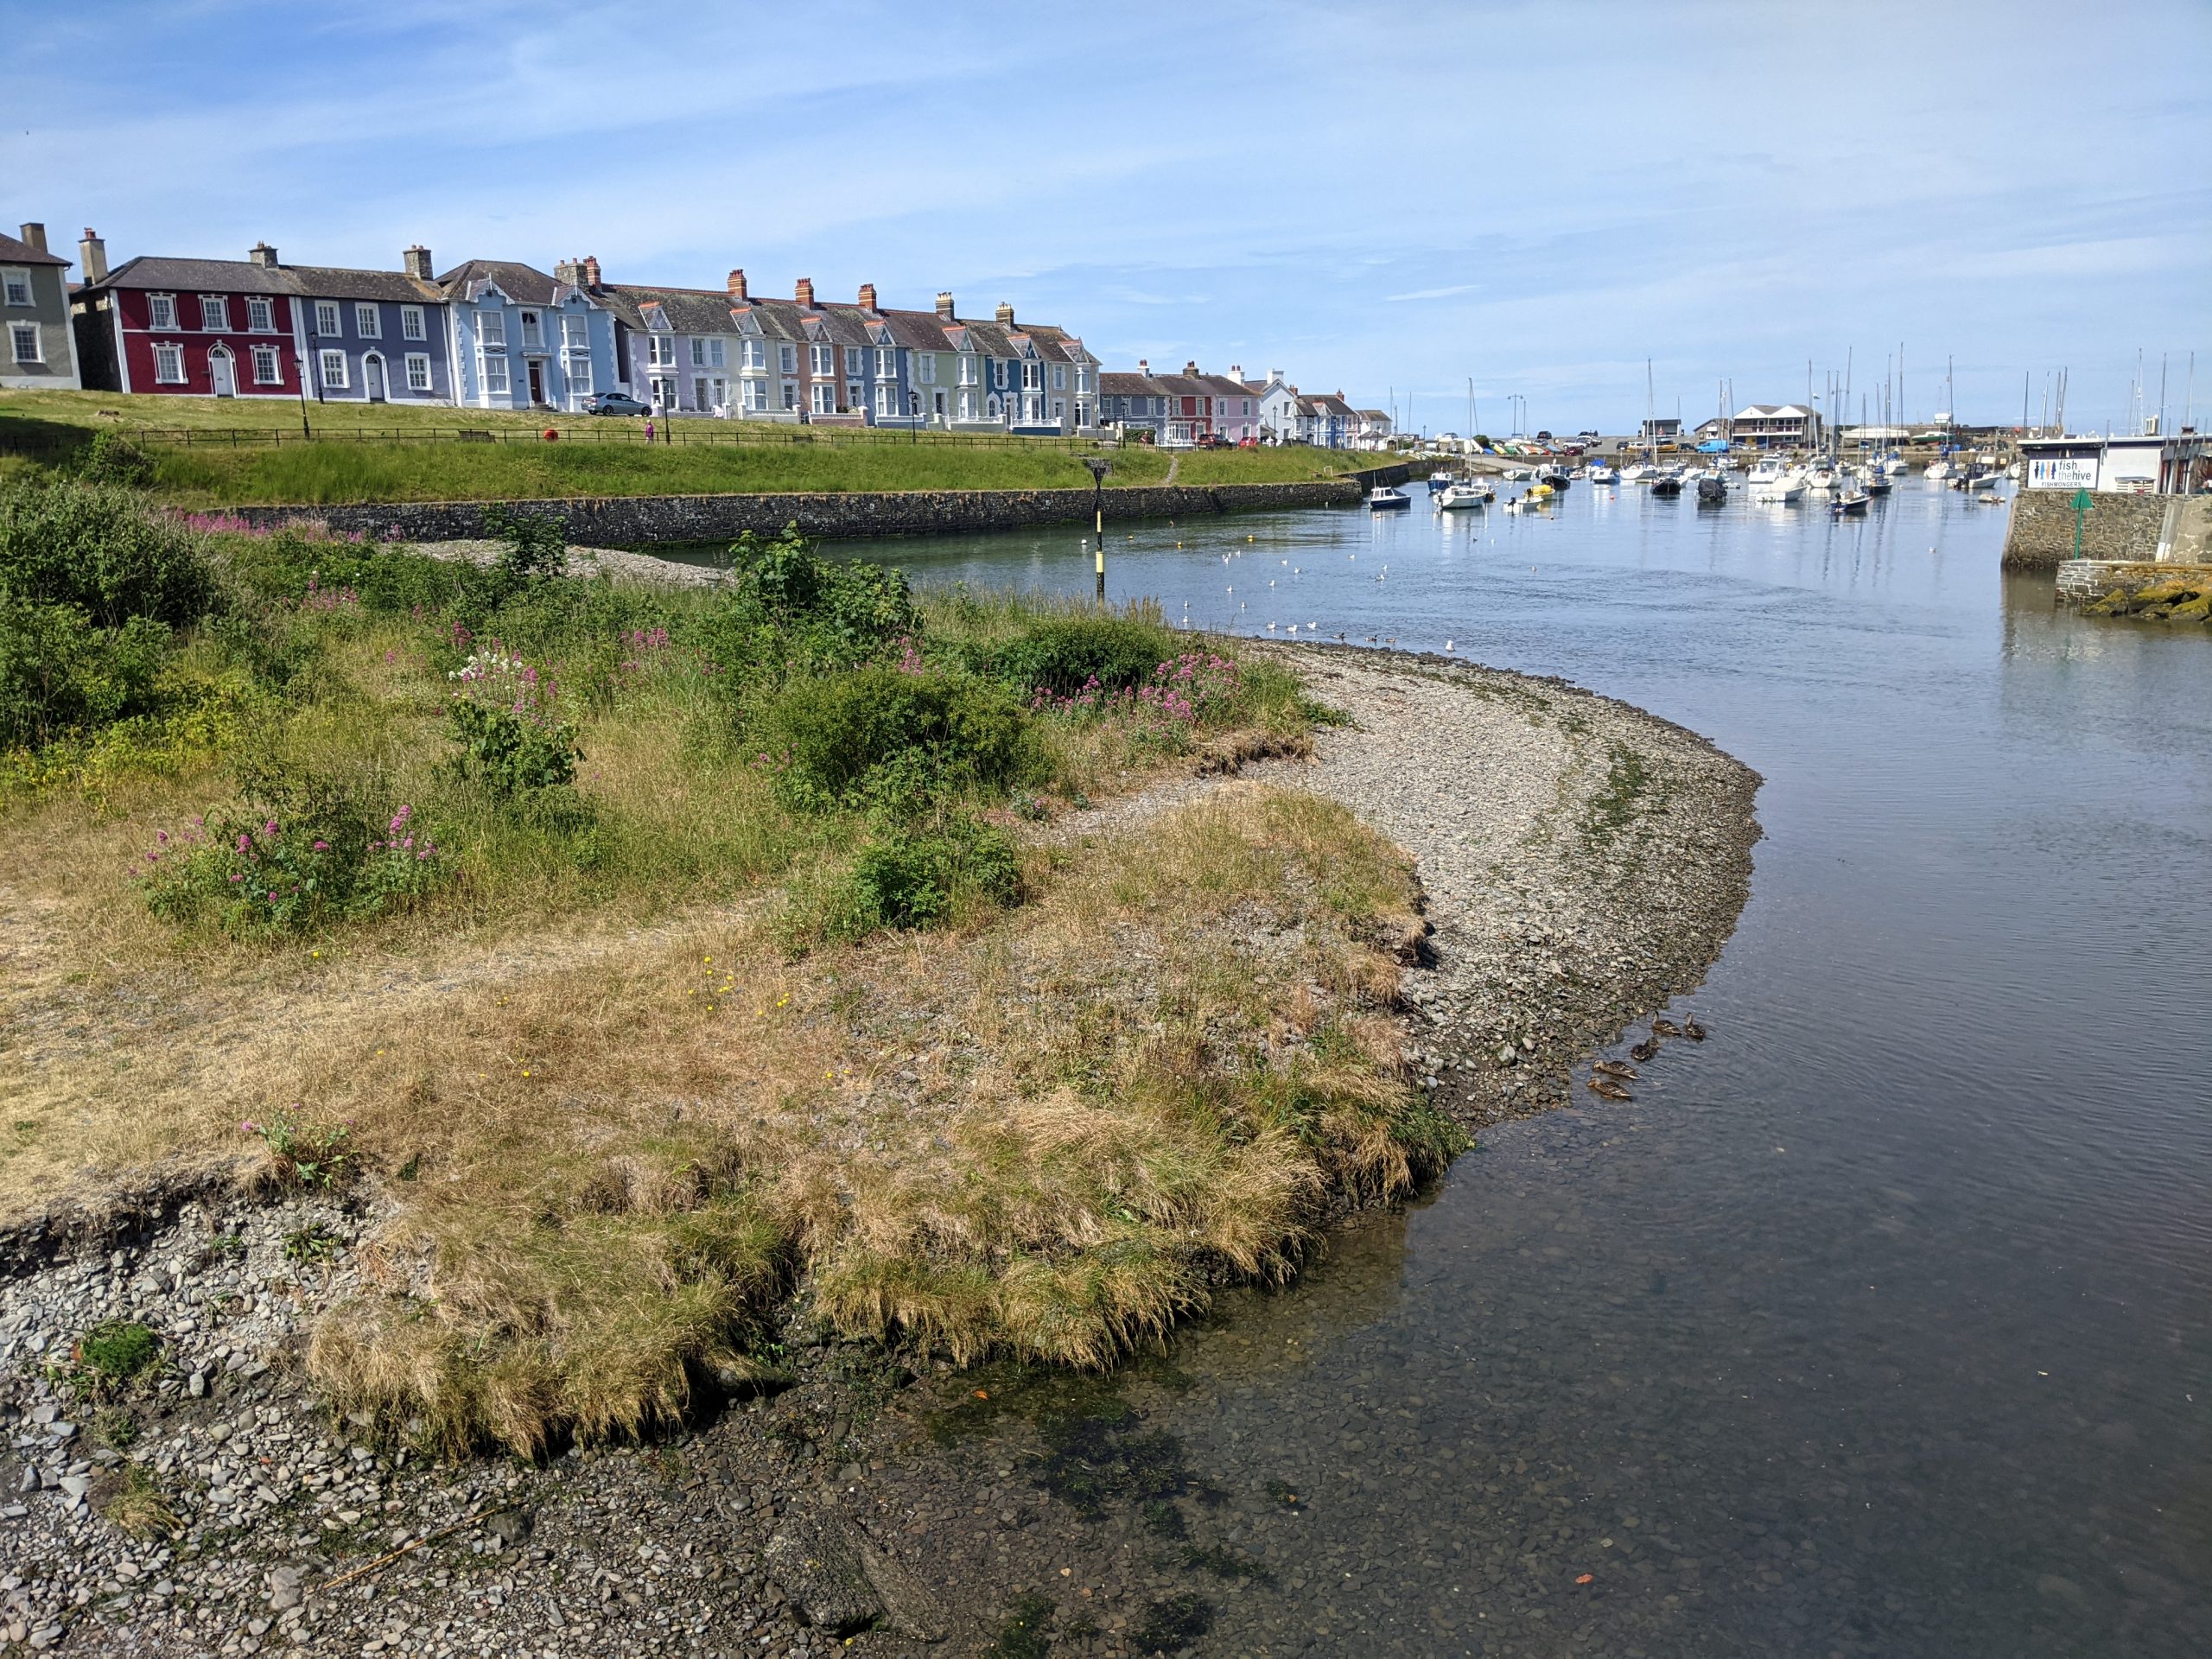 Water with riverside habitats and boats, with the town of Aberaeron in the background.